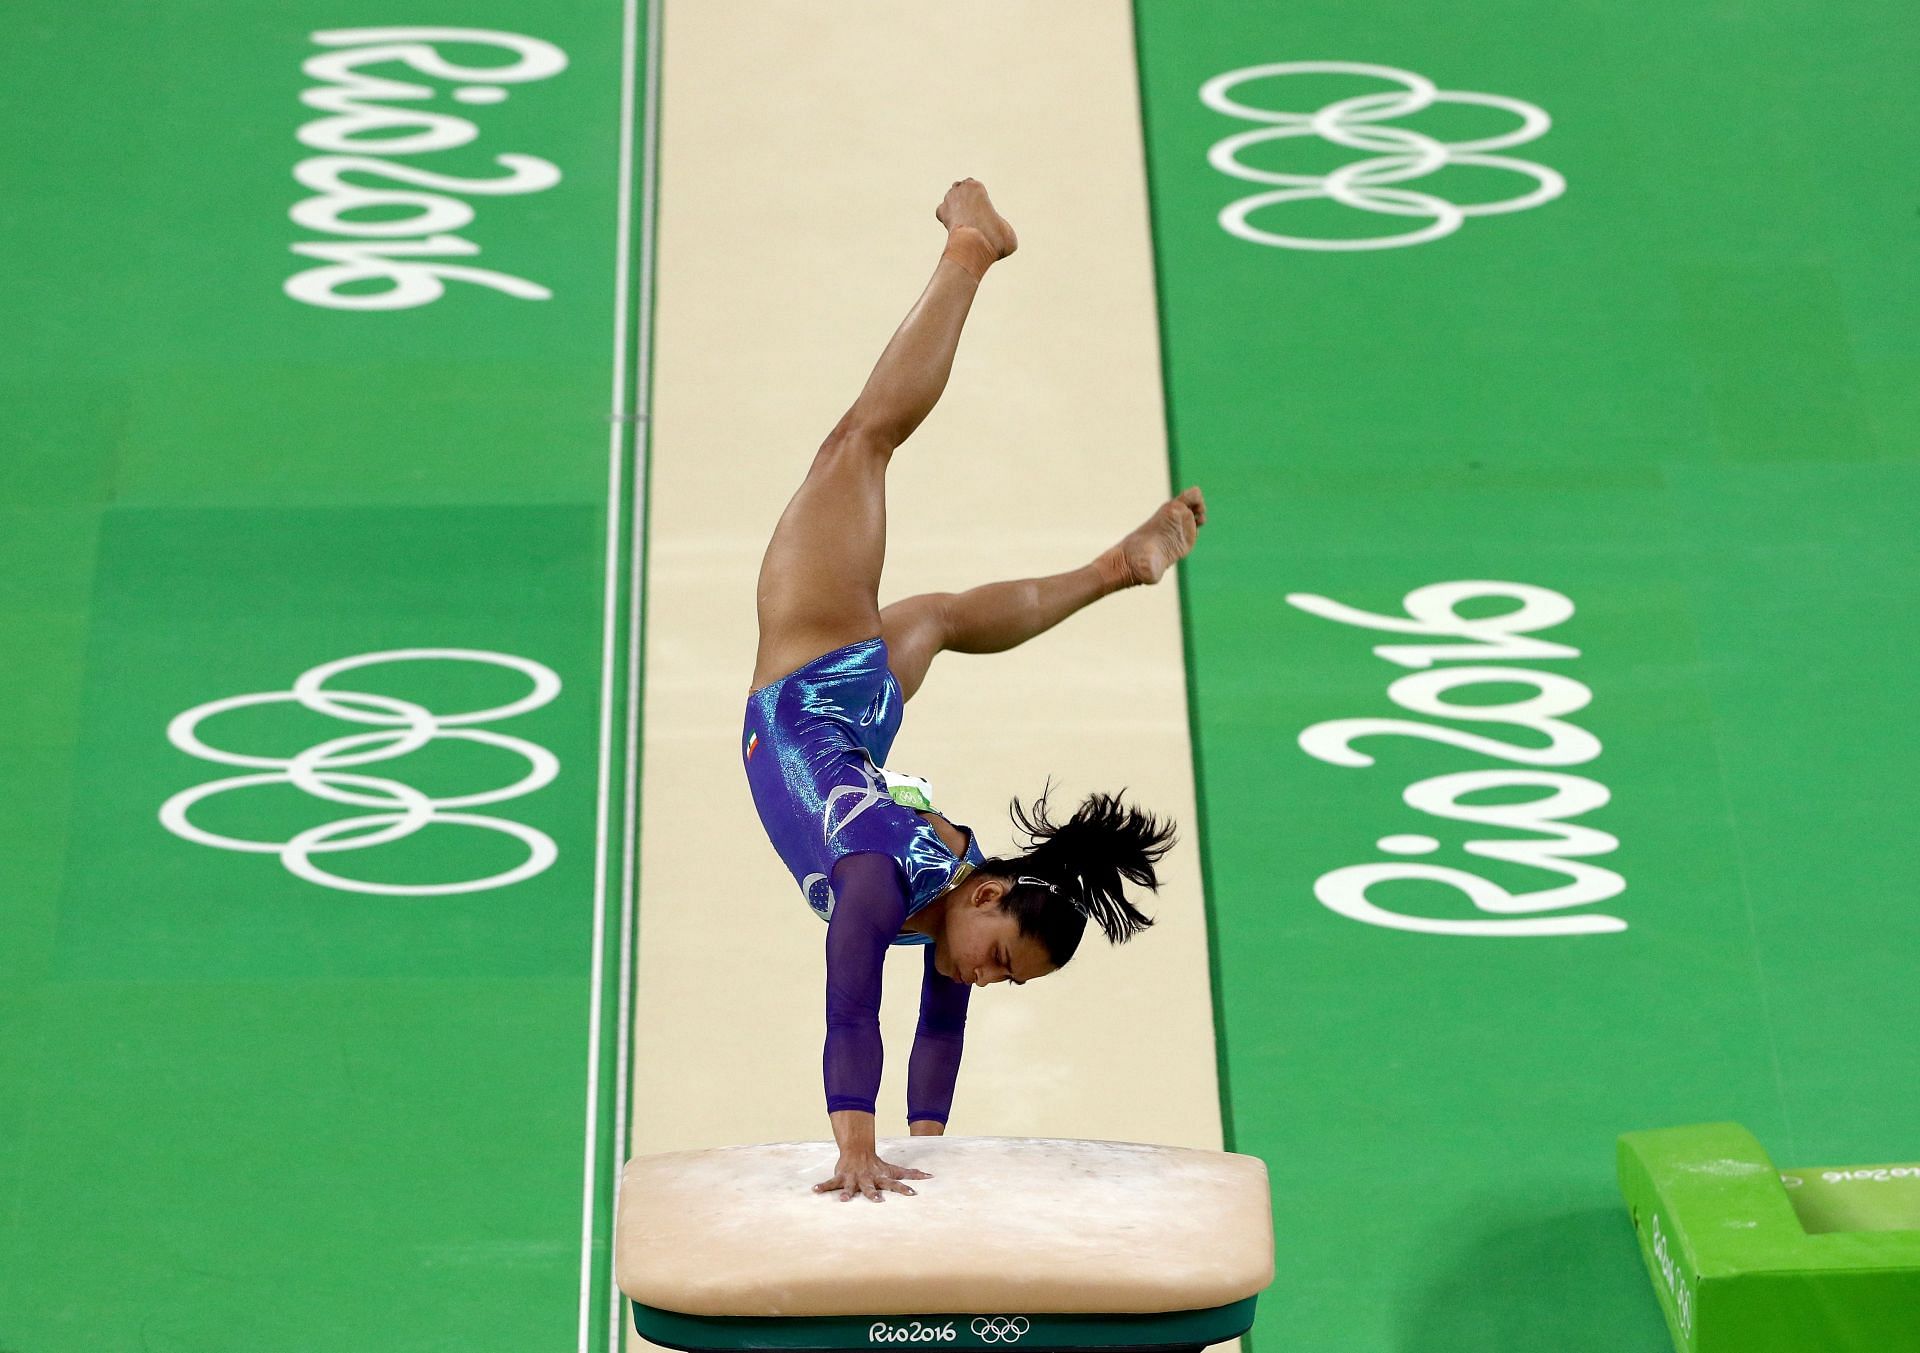 Dipa Karmakar in action at the Rio Olympics (Image courtesy: Getty Images)